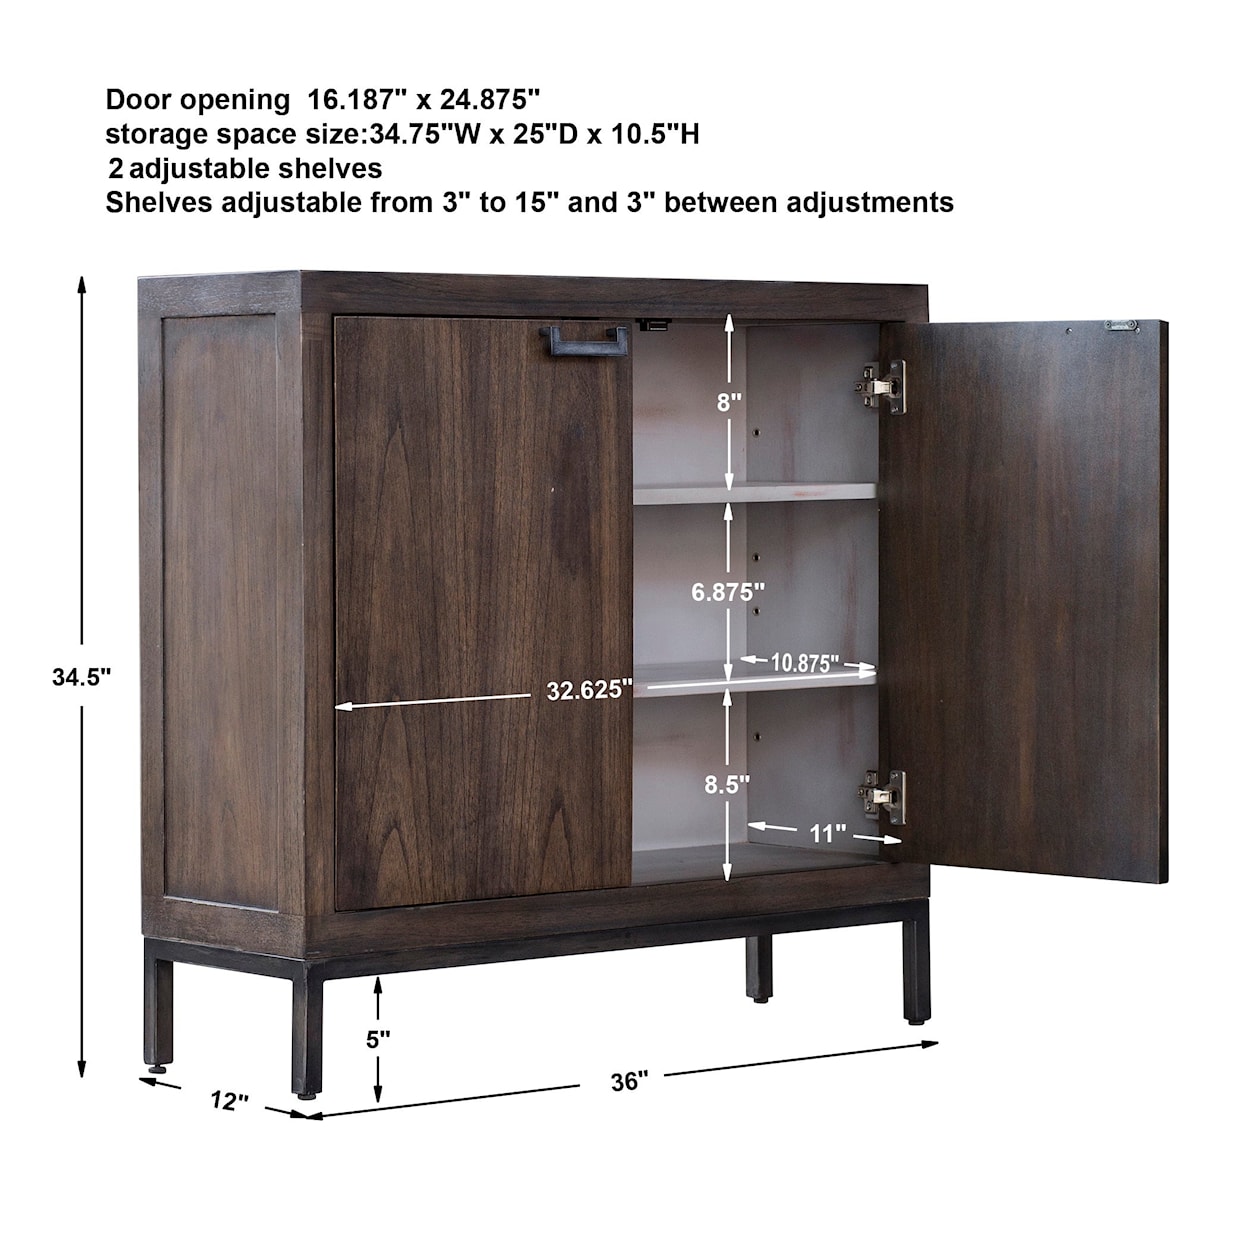 Uttermost Accent Furniture - Chests Nadie Light Walnut Console Cabinet